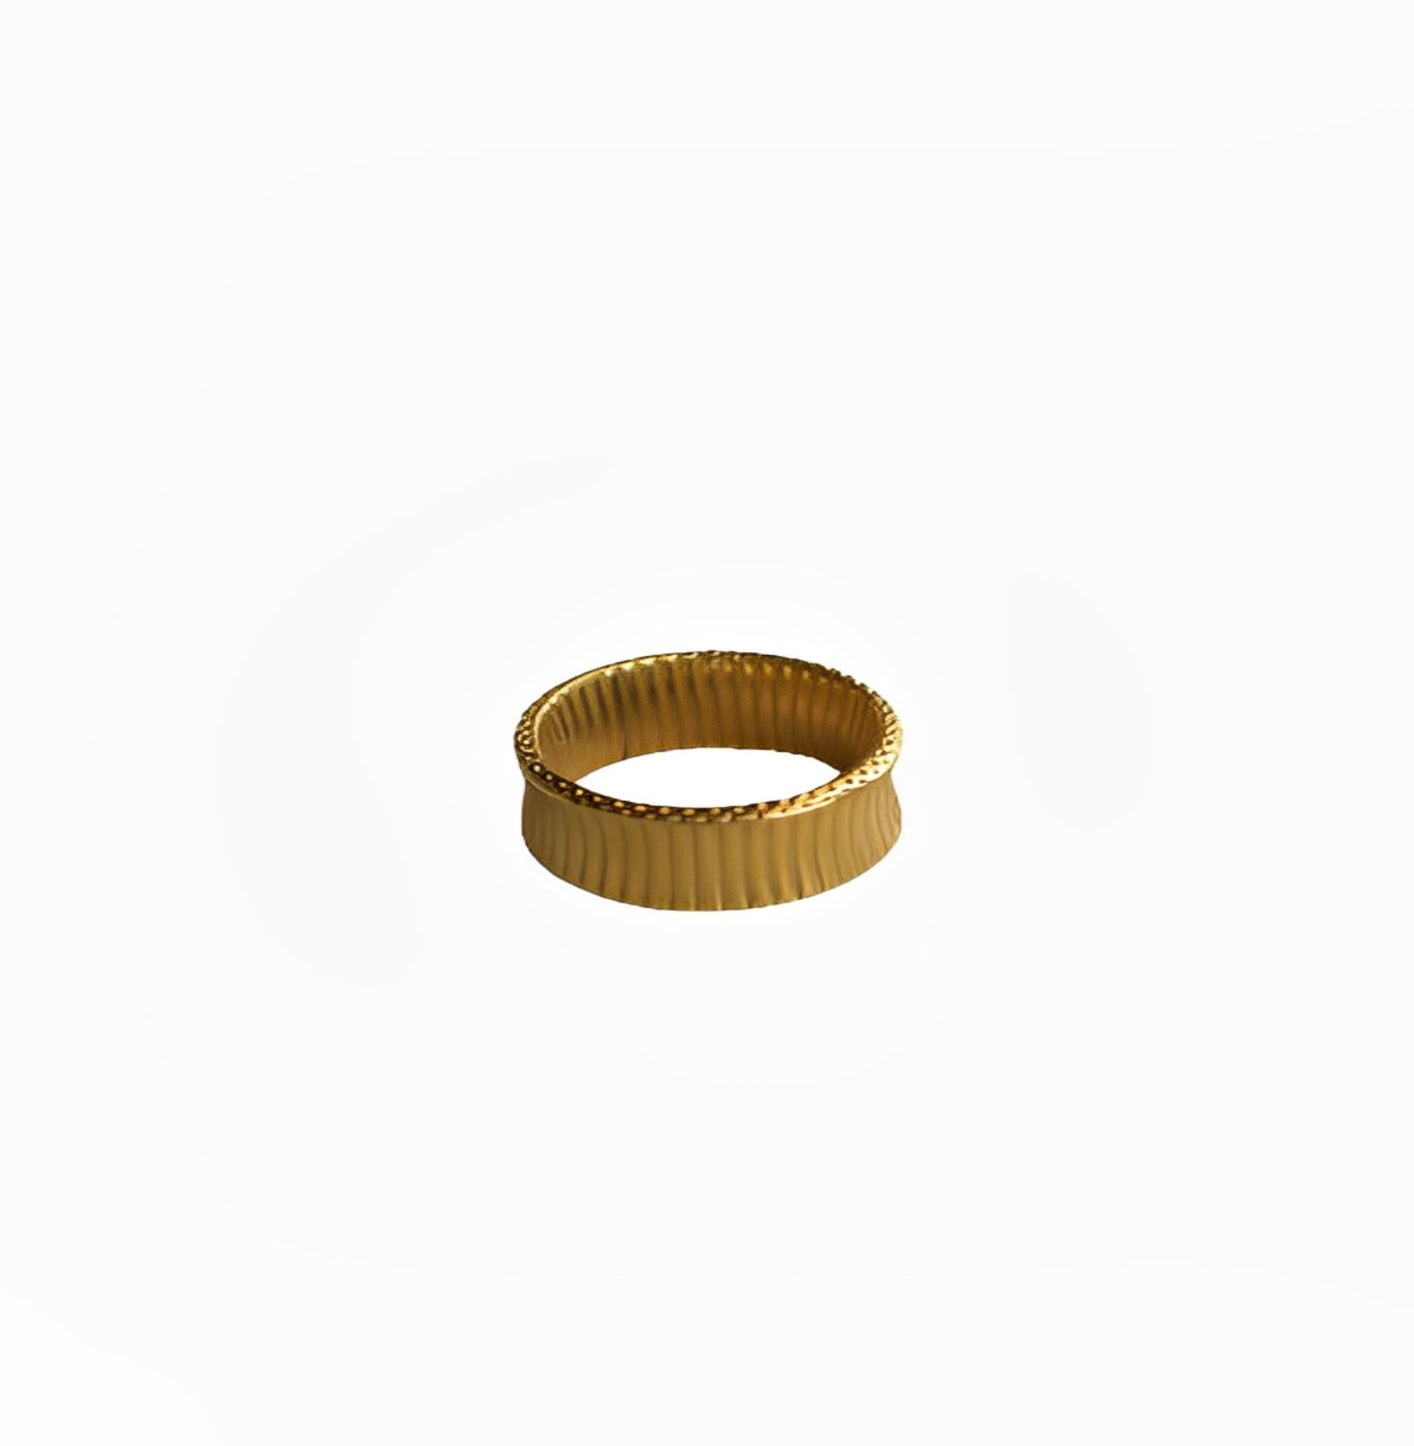 THIAGO BOLD RING ring Yubama Jewelry Online Store - The Elegant Designs of Gold and Silver ! 